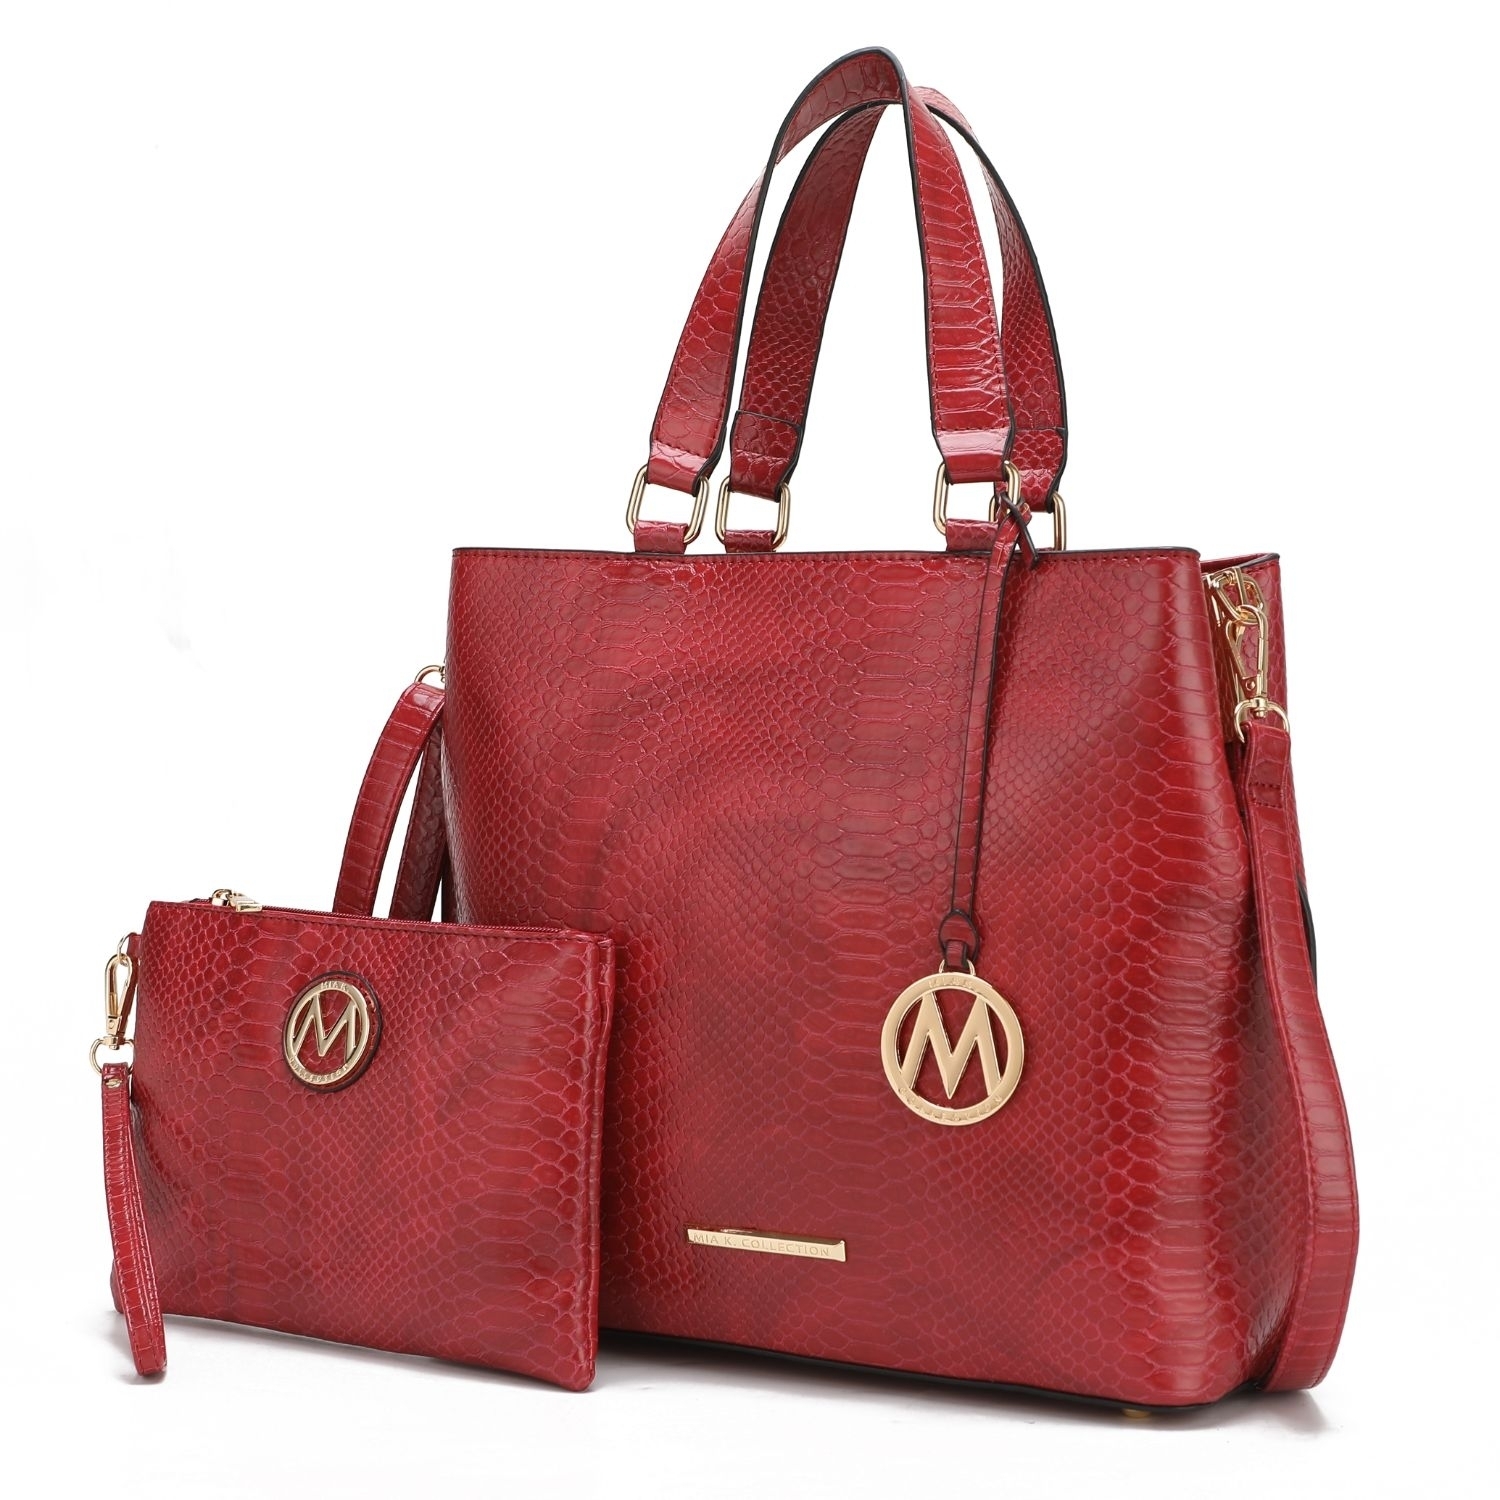 MKF Collection Beryl Snake-embossed Vegan Leather Women's Tote Handbag With Wristlet - 2 Pieces, By Mia K - Navy